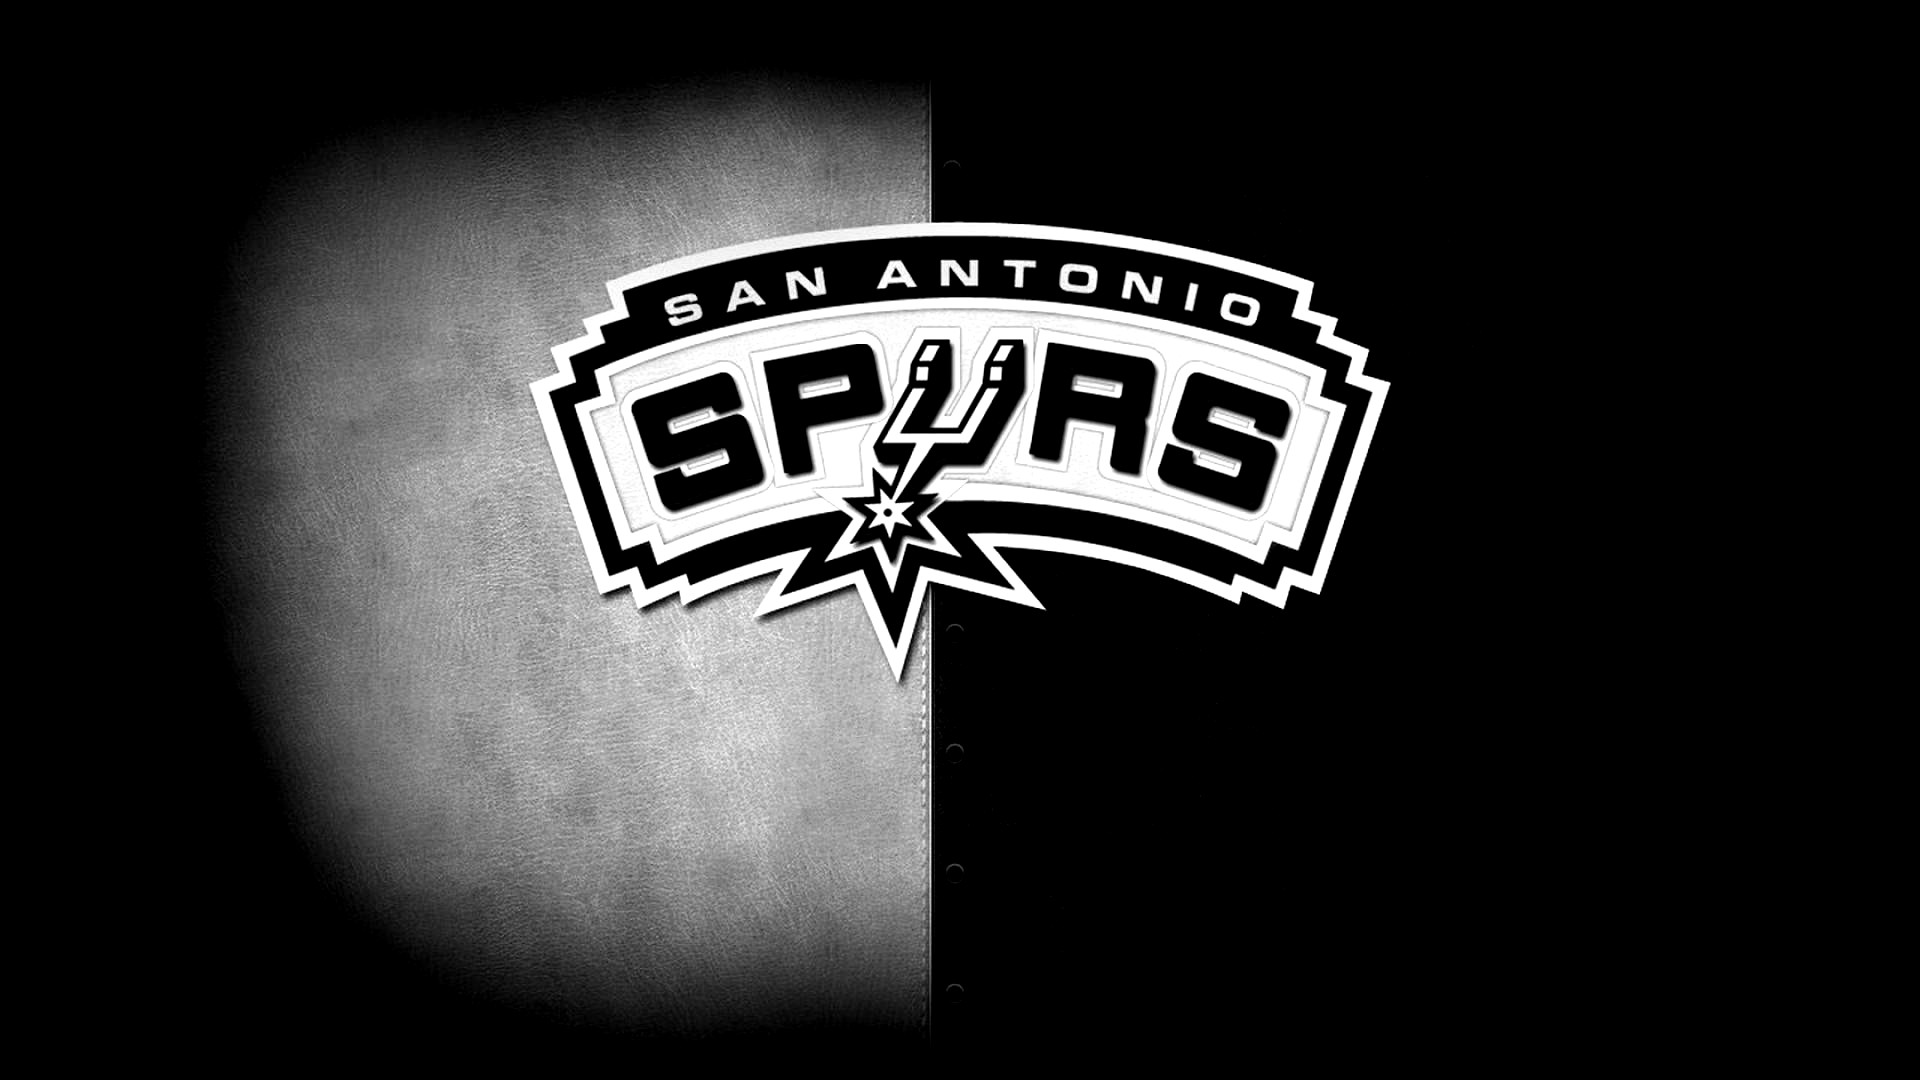 Wallpapers HD San Antonio Spurs Logo with high-resolution 1920x1080 pixel. You can use this wallpaper for your Desktop Computer Backgrounds, Windows or Mac Screensavers, iPhone Lock screen, Tablet or Android and another Mobile Phone device